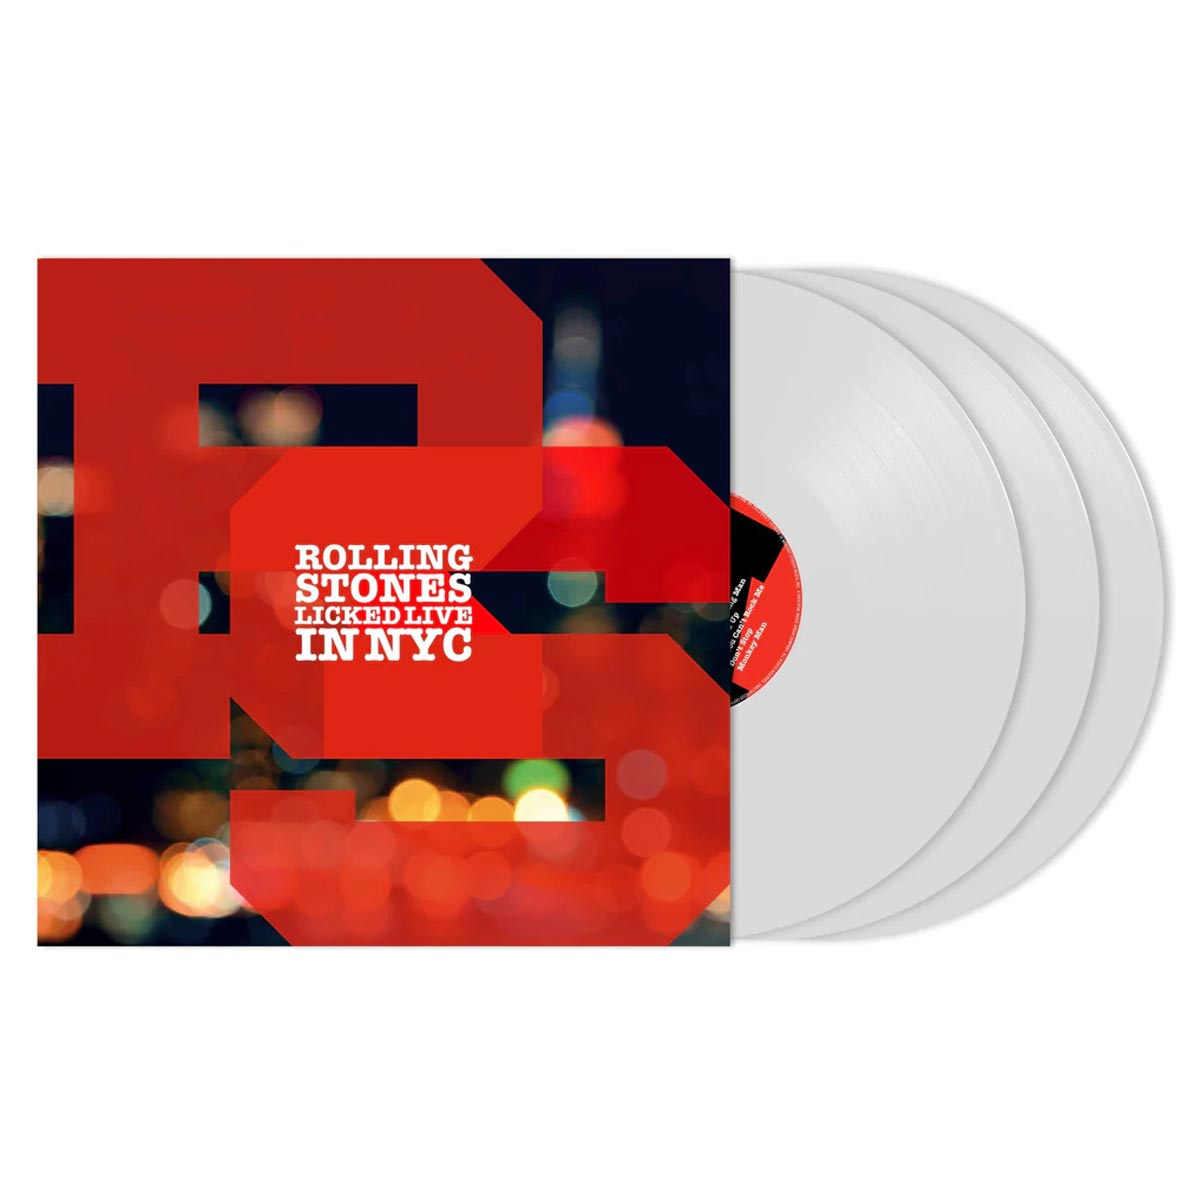 Rolling Stones: Licked Live in NYC (White/Ltd)